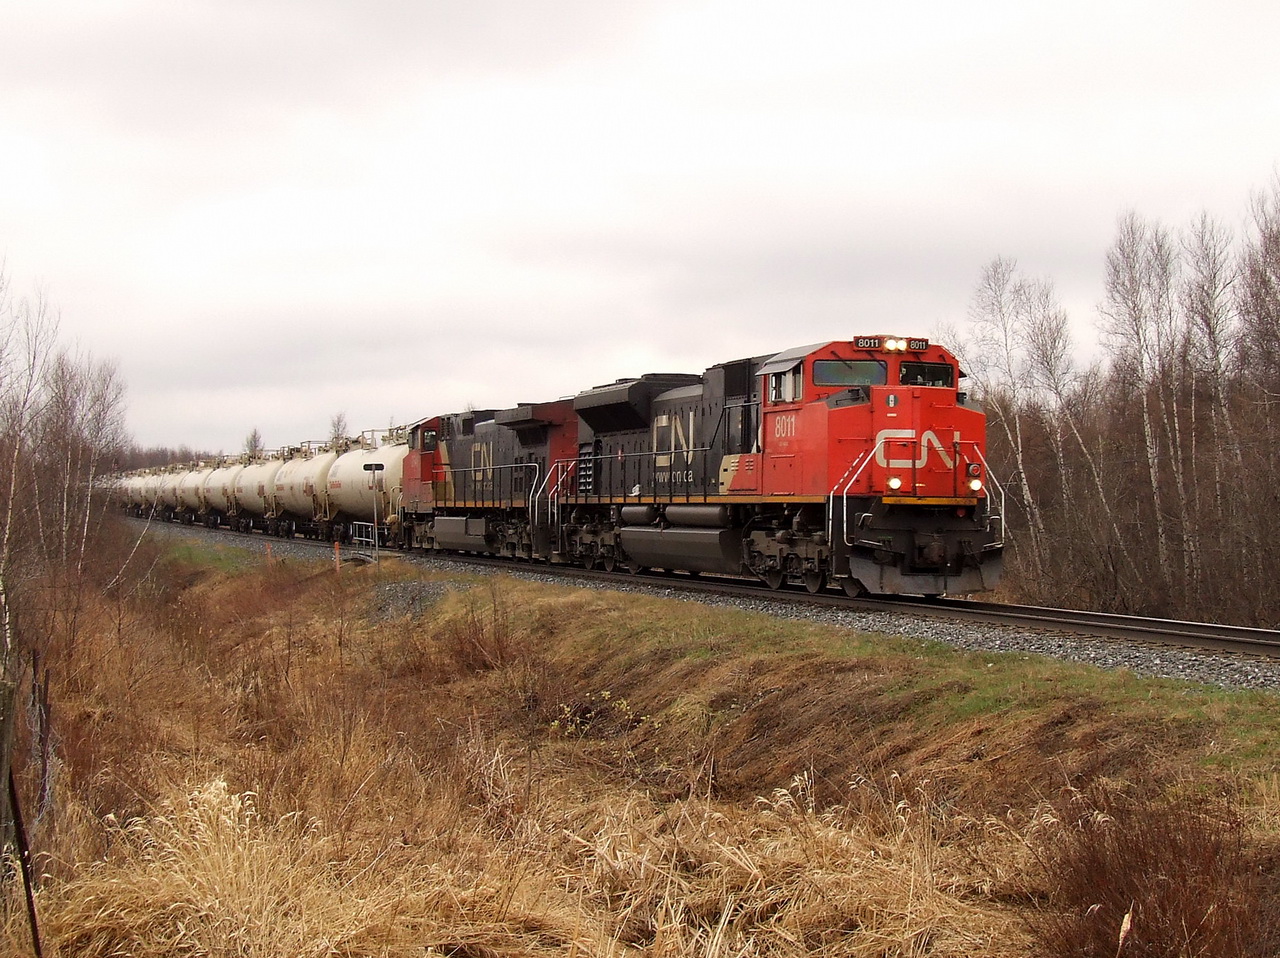 CN 782 MT moves at a good pace with only 8011 pulling,the gas train saves fuel.